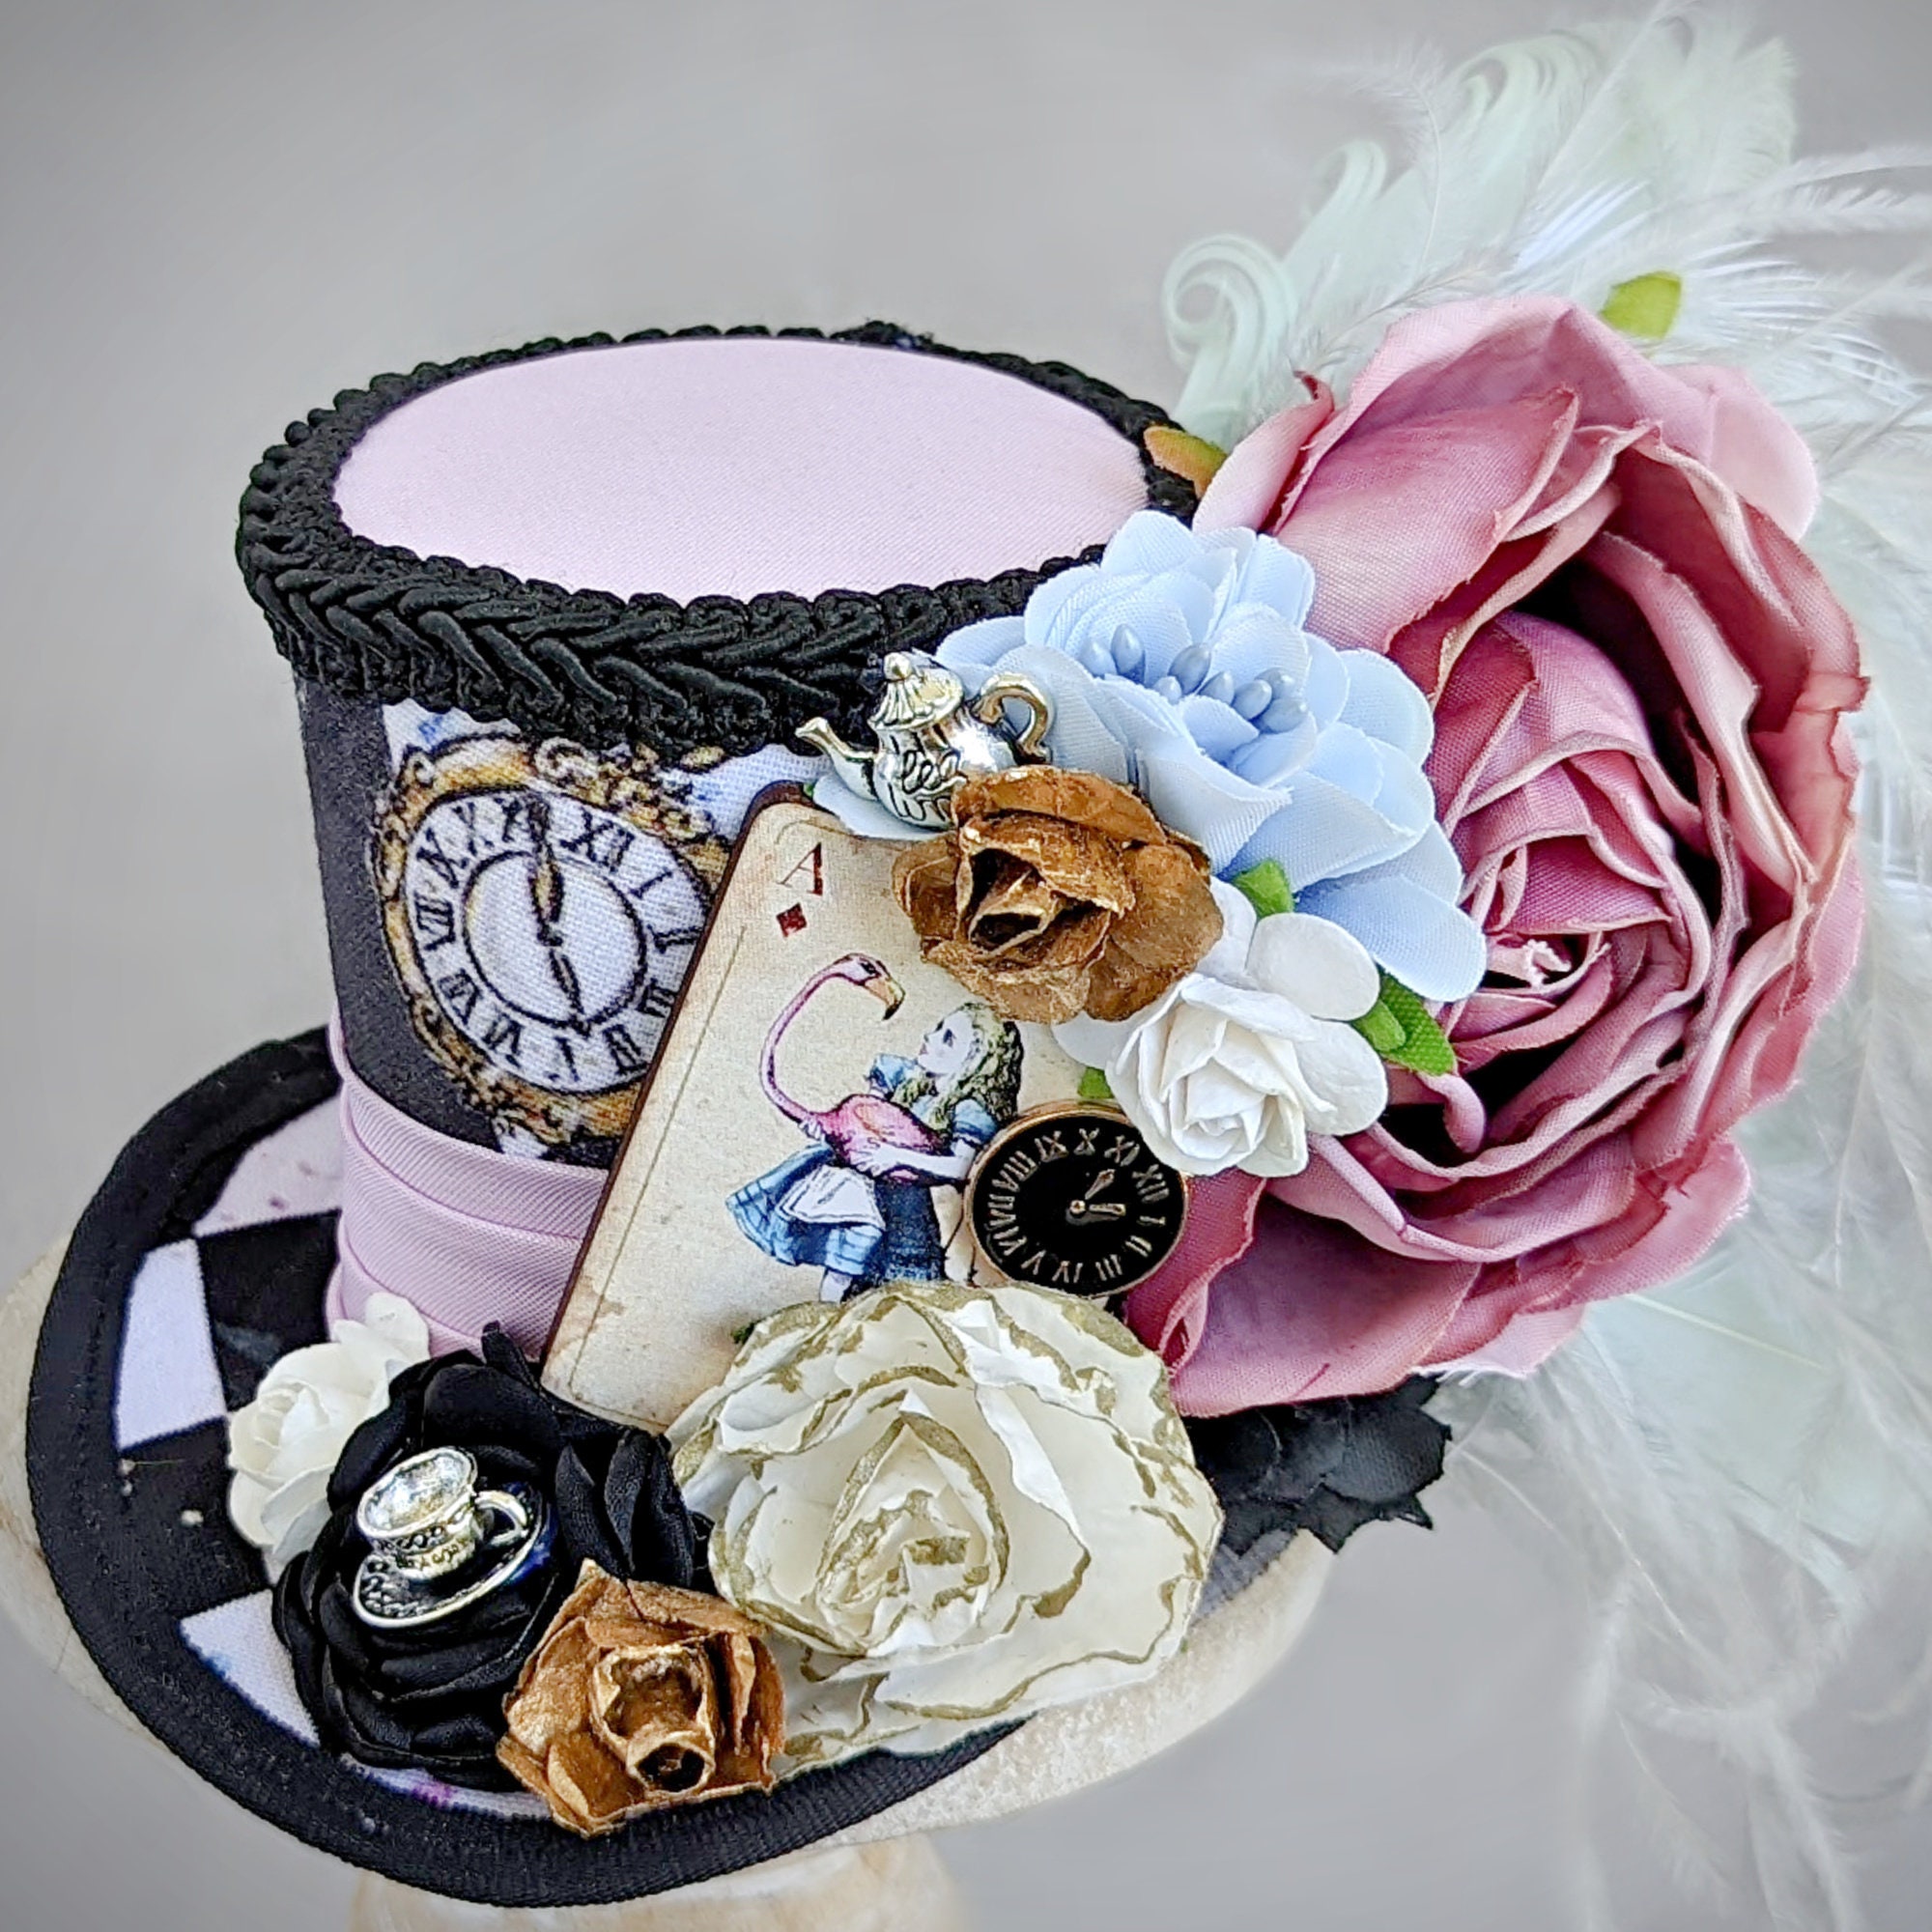 Mad Hatter Tea Party Decor - Mad Hatter Centerpiece